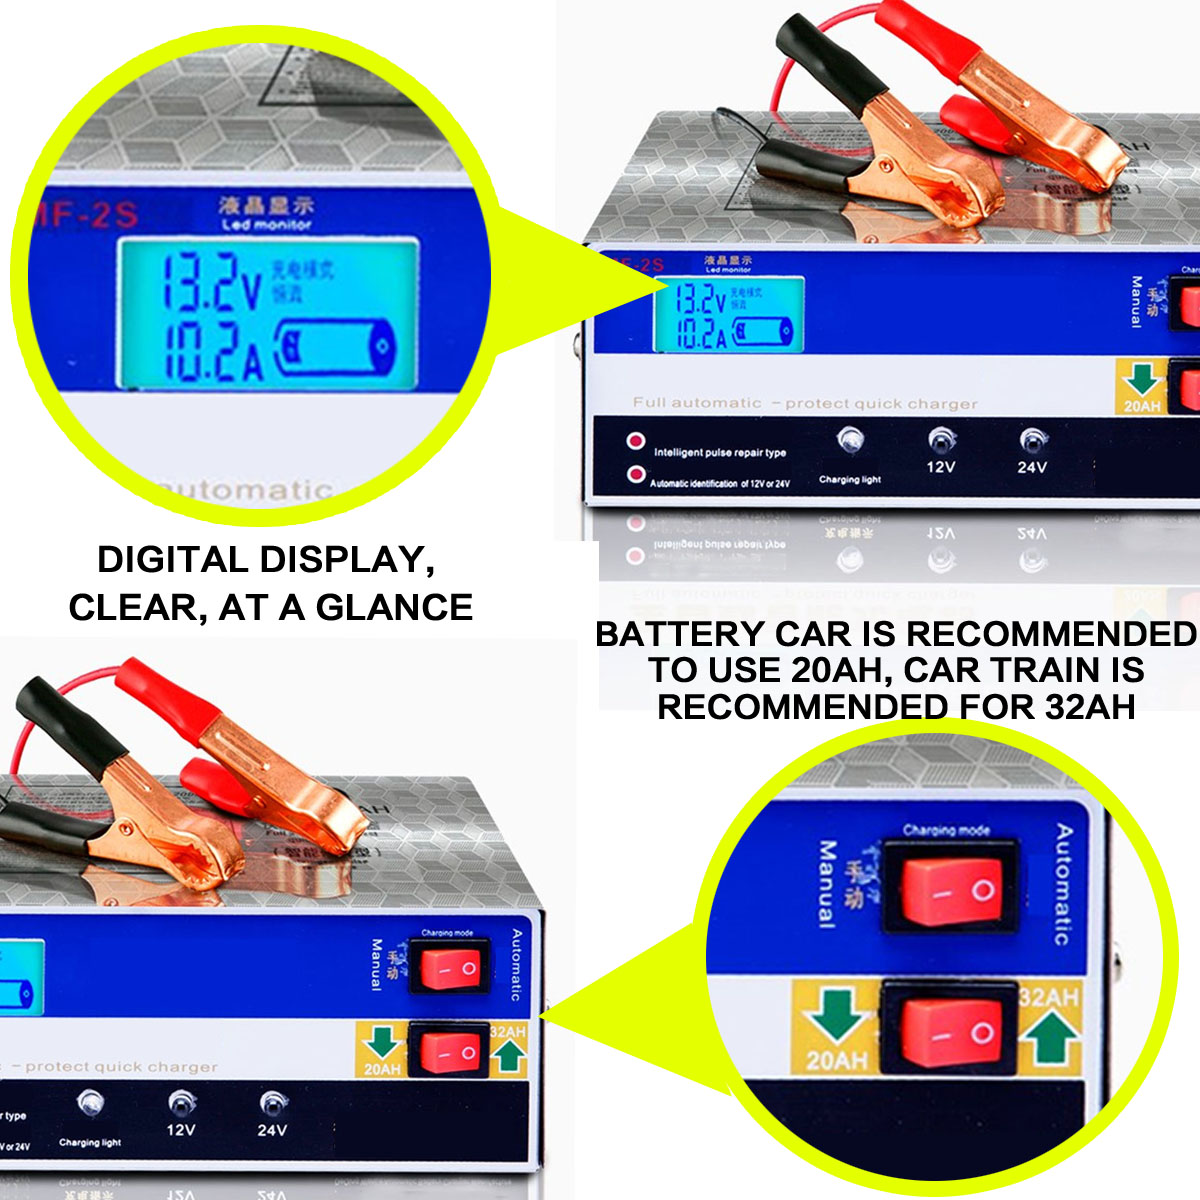 260W 12V//24V Universal Electric Car Li-Ion Battery Charger for Automobile Motorc